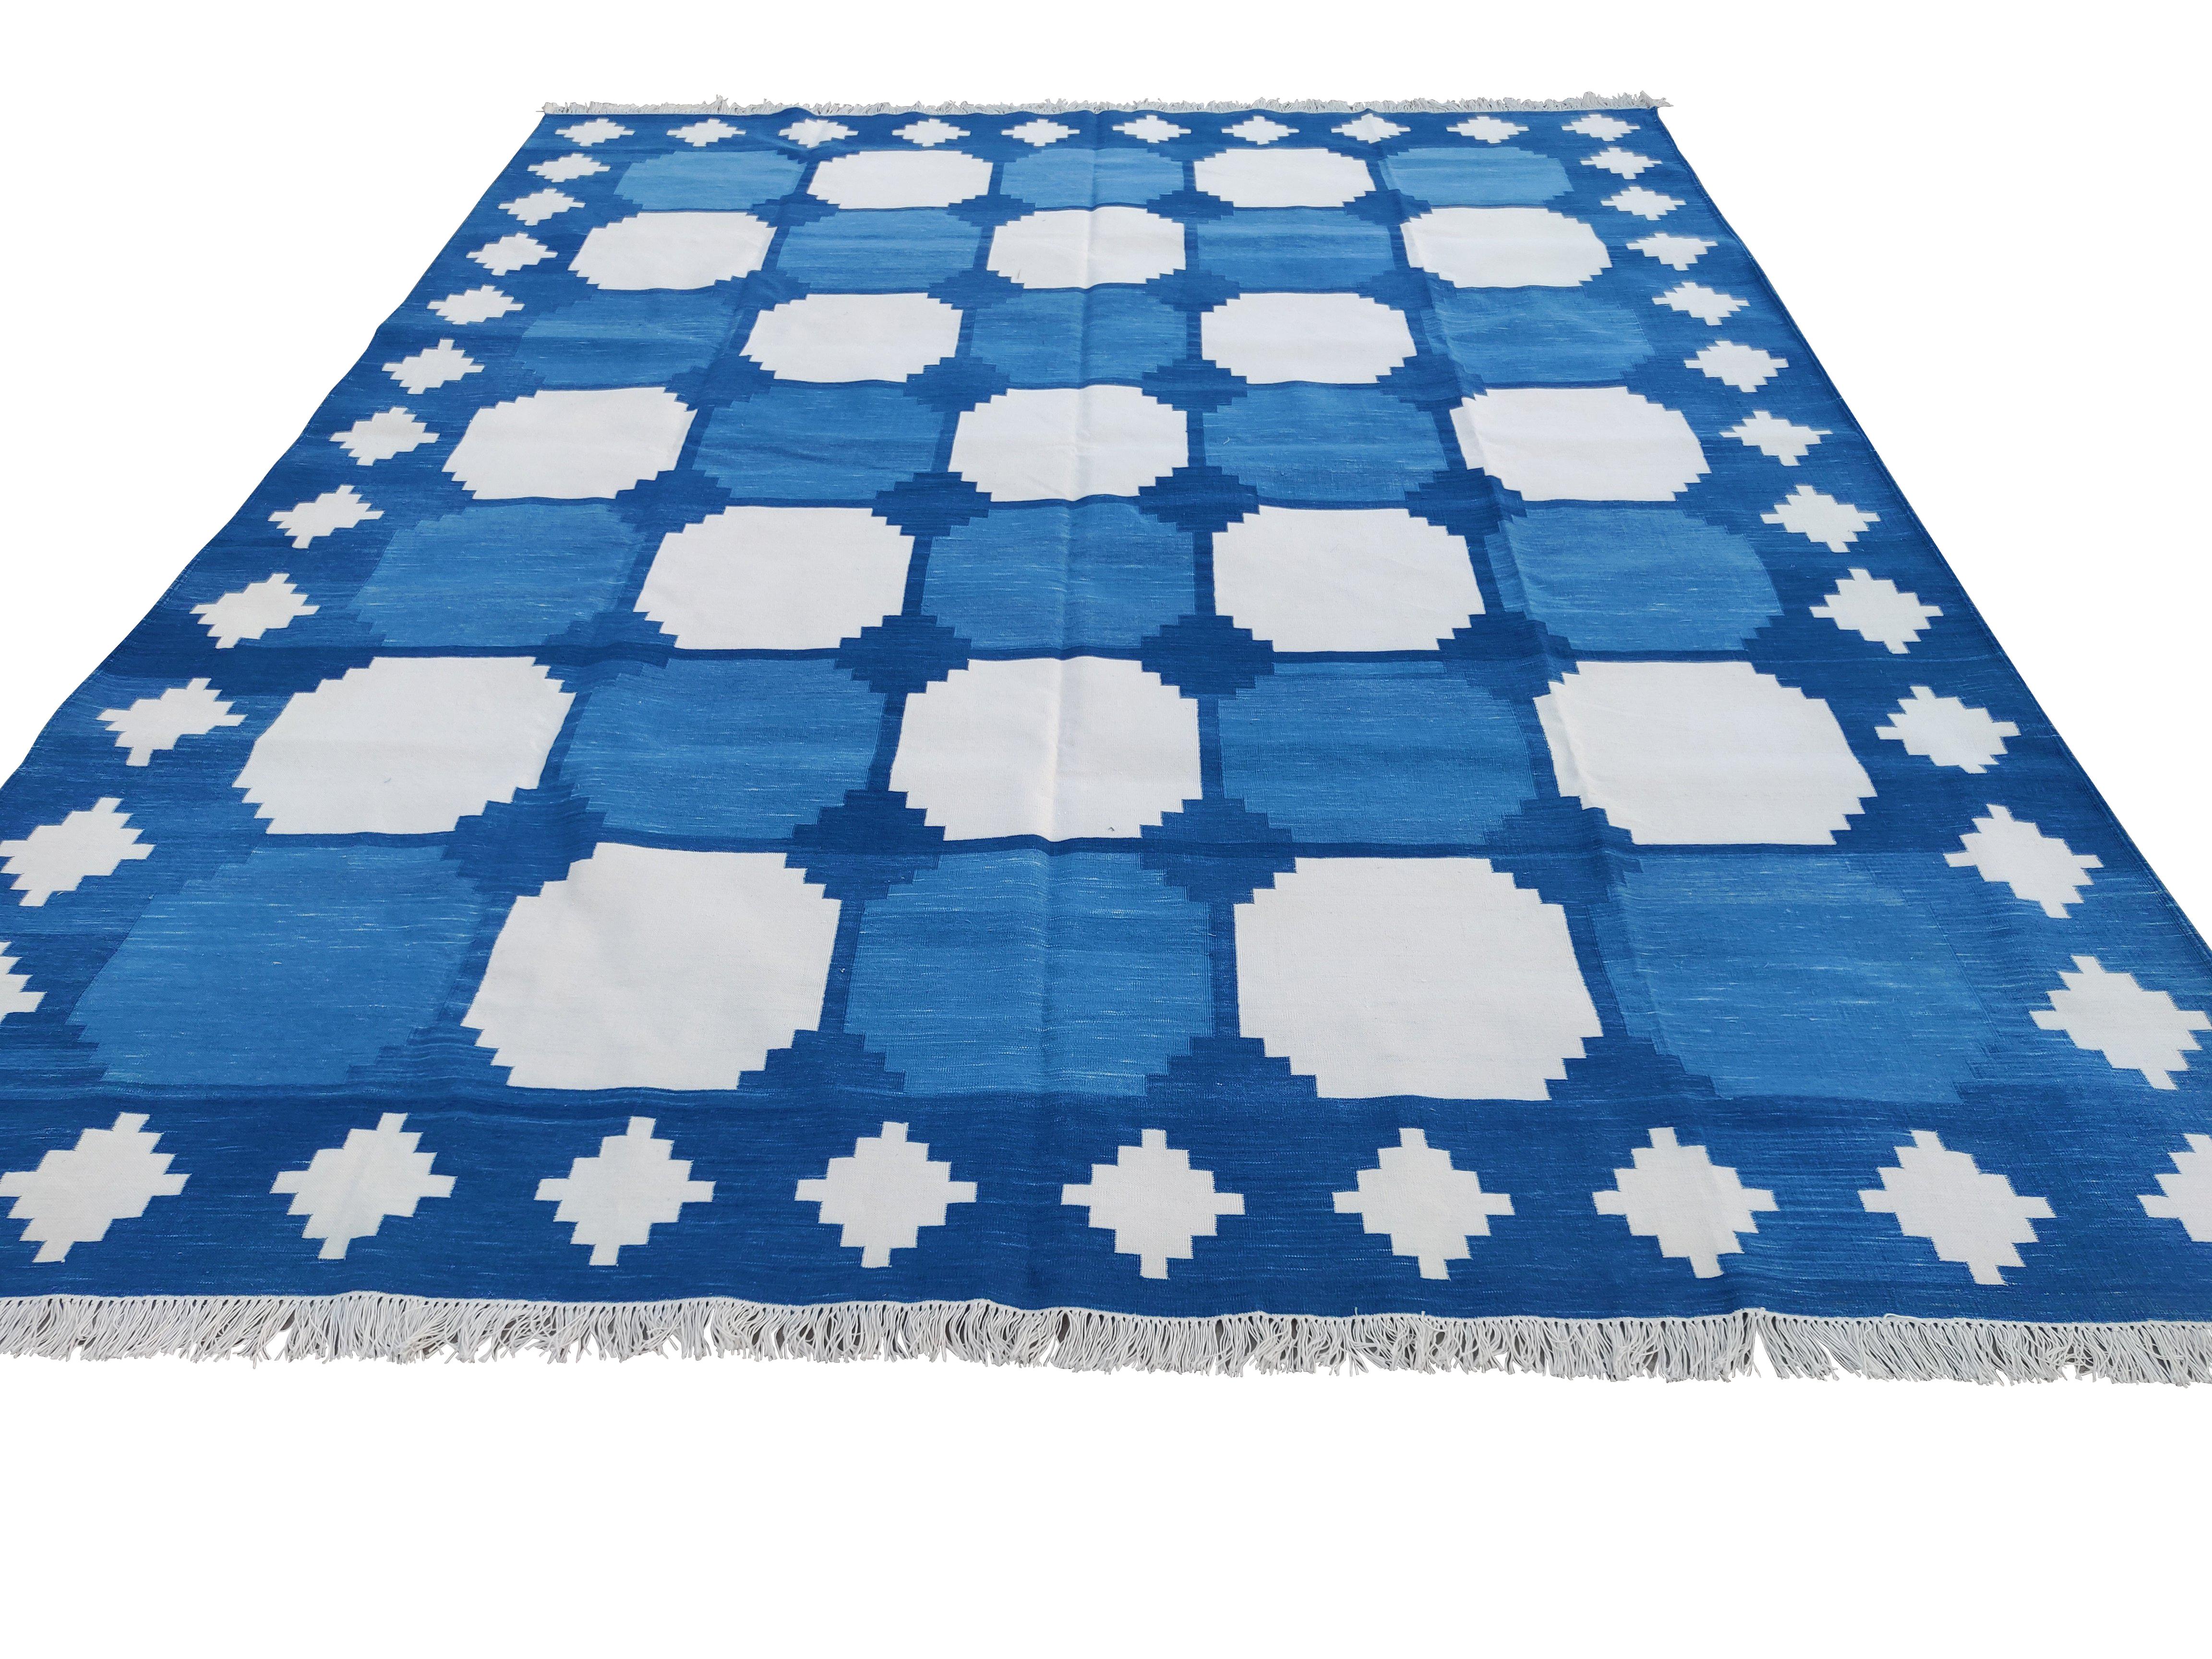 Hand-Woven Handmade Cotton Area Flat Weave Rug, Blue And White Geometric Indian Dhurrie-6x9 For Sale